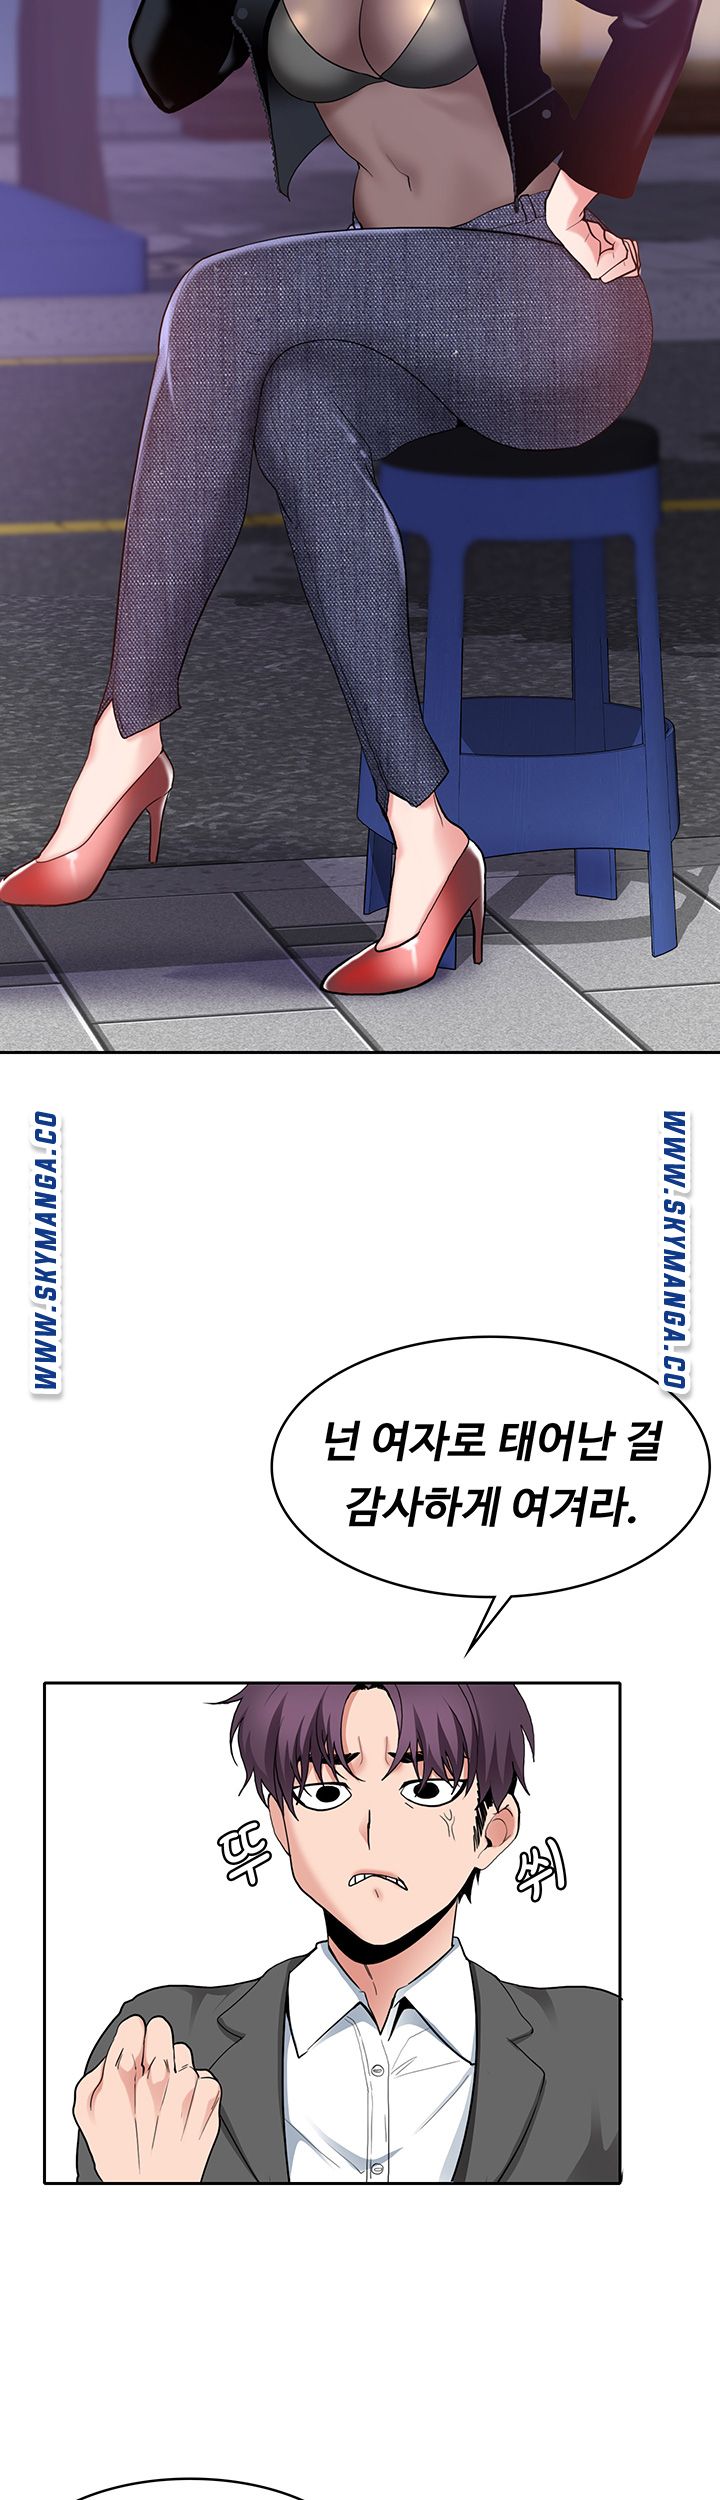 Wanna Service (Do You Want a Service?) Raw - Chapter 2 Page 28